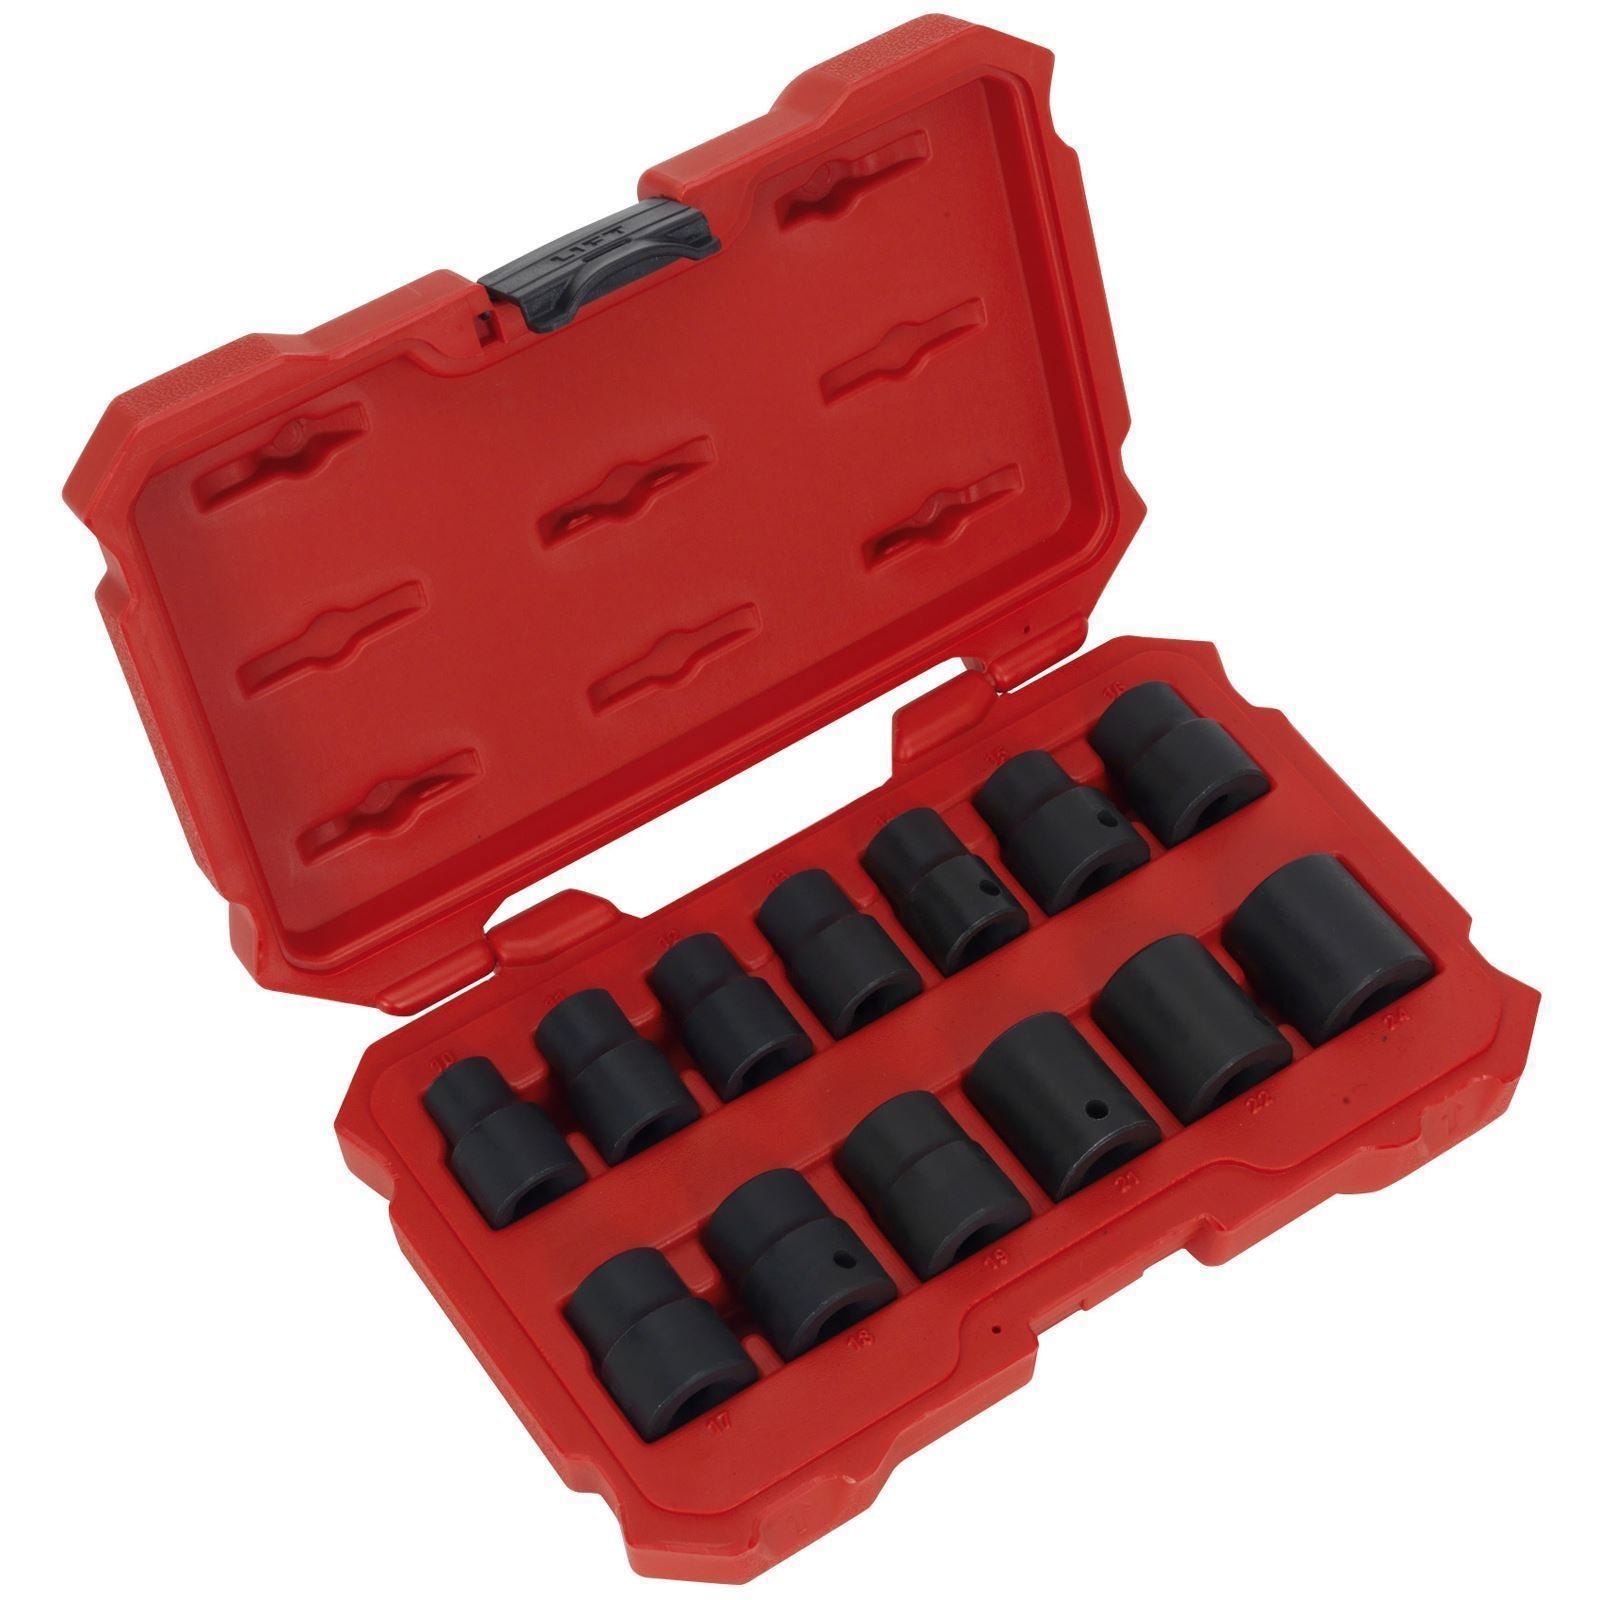 Sealey Premier 13 Piece 1/2" Drive Lock On Impact Socket Set 10-24mm Rounded Nuts